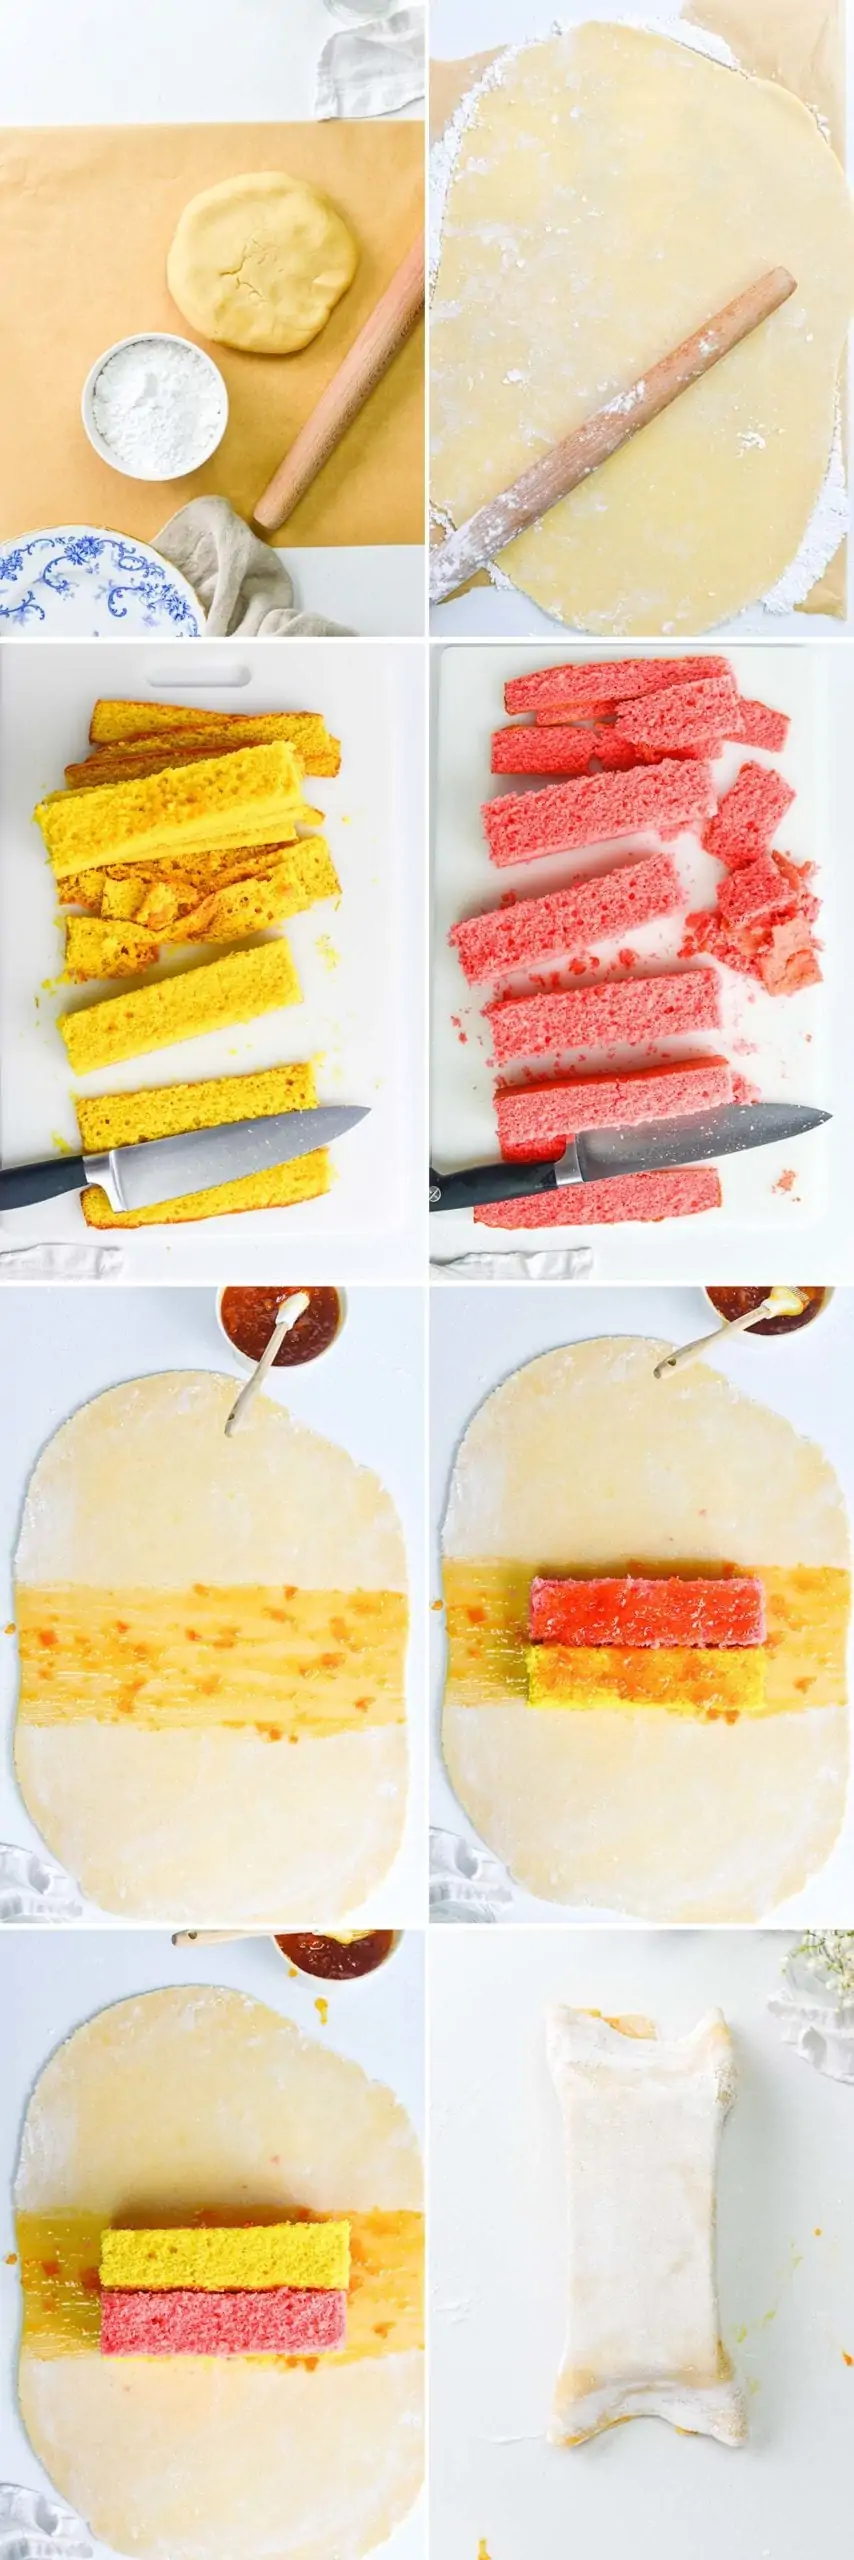 8 image collage showing how to assemble battenberg cake